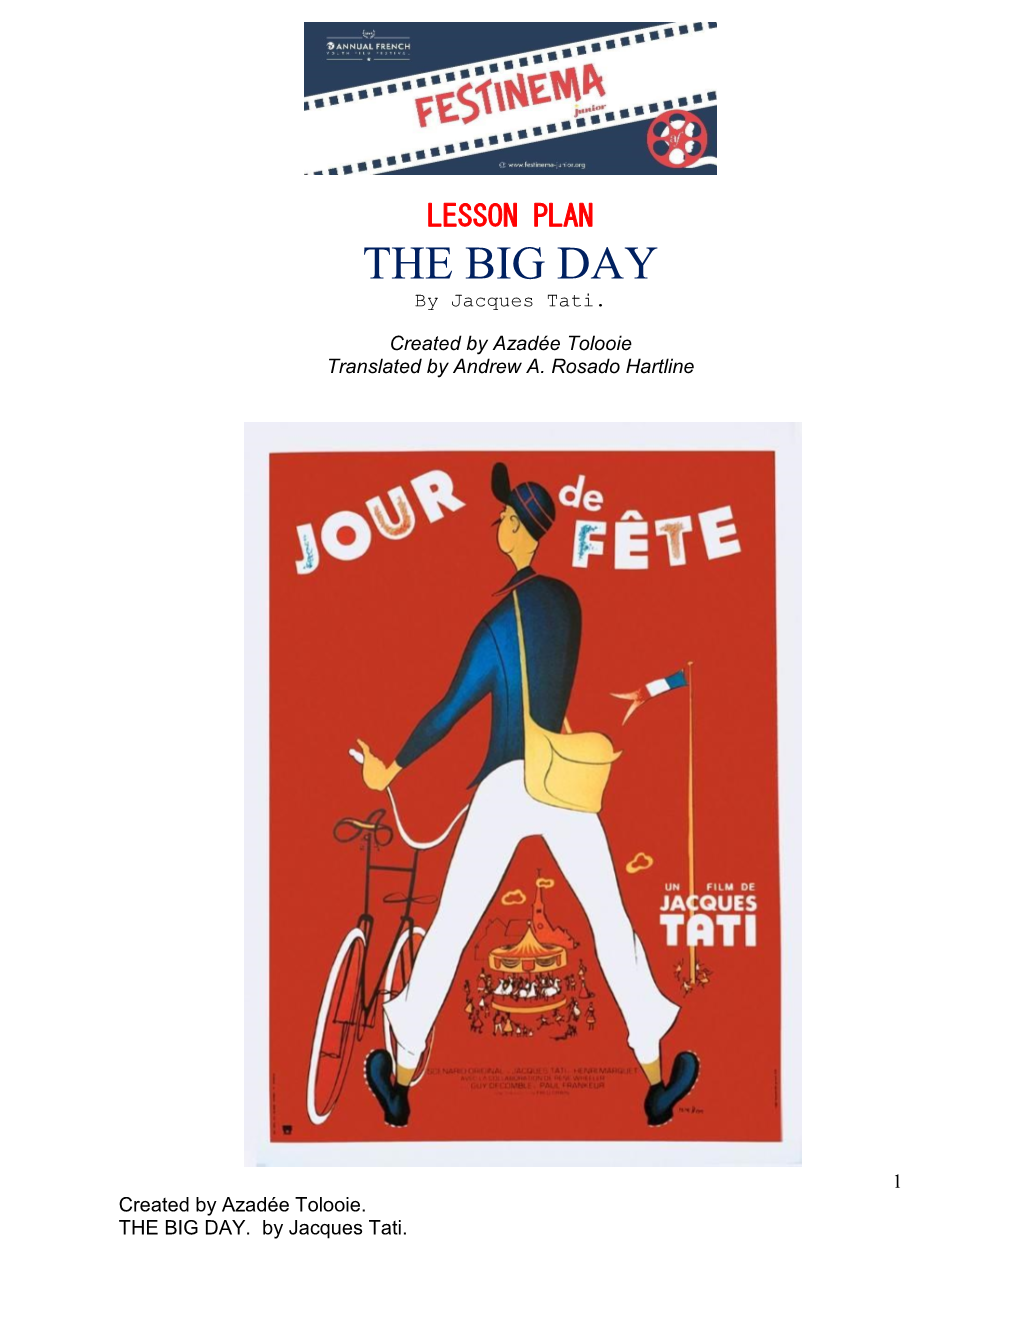 THE BIG DAY by Jacques Tati